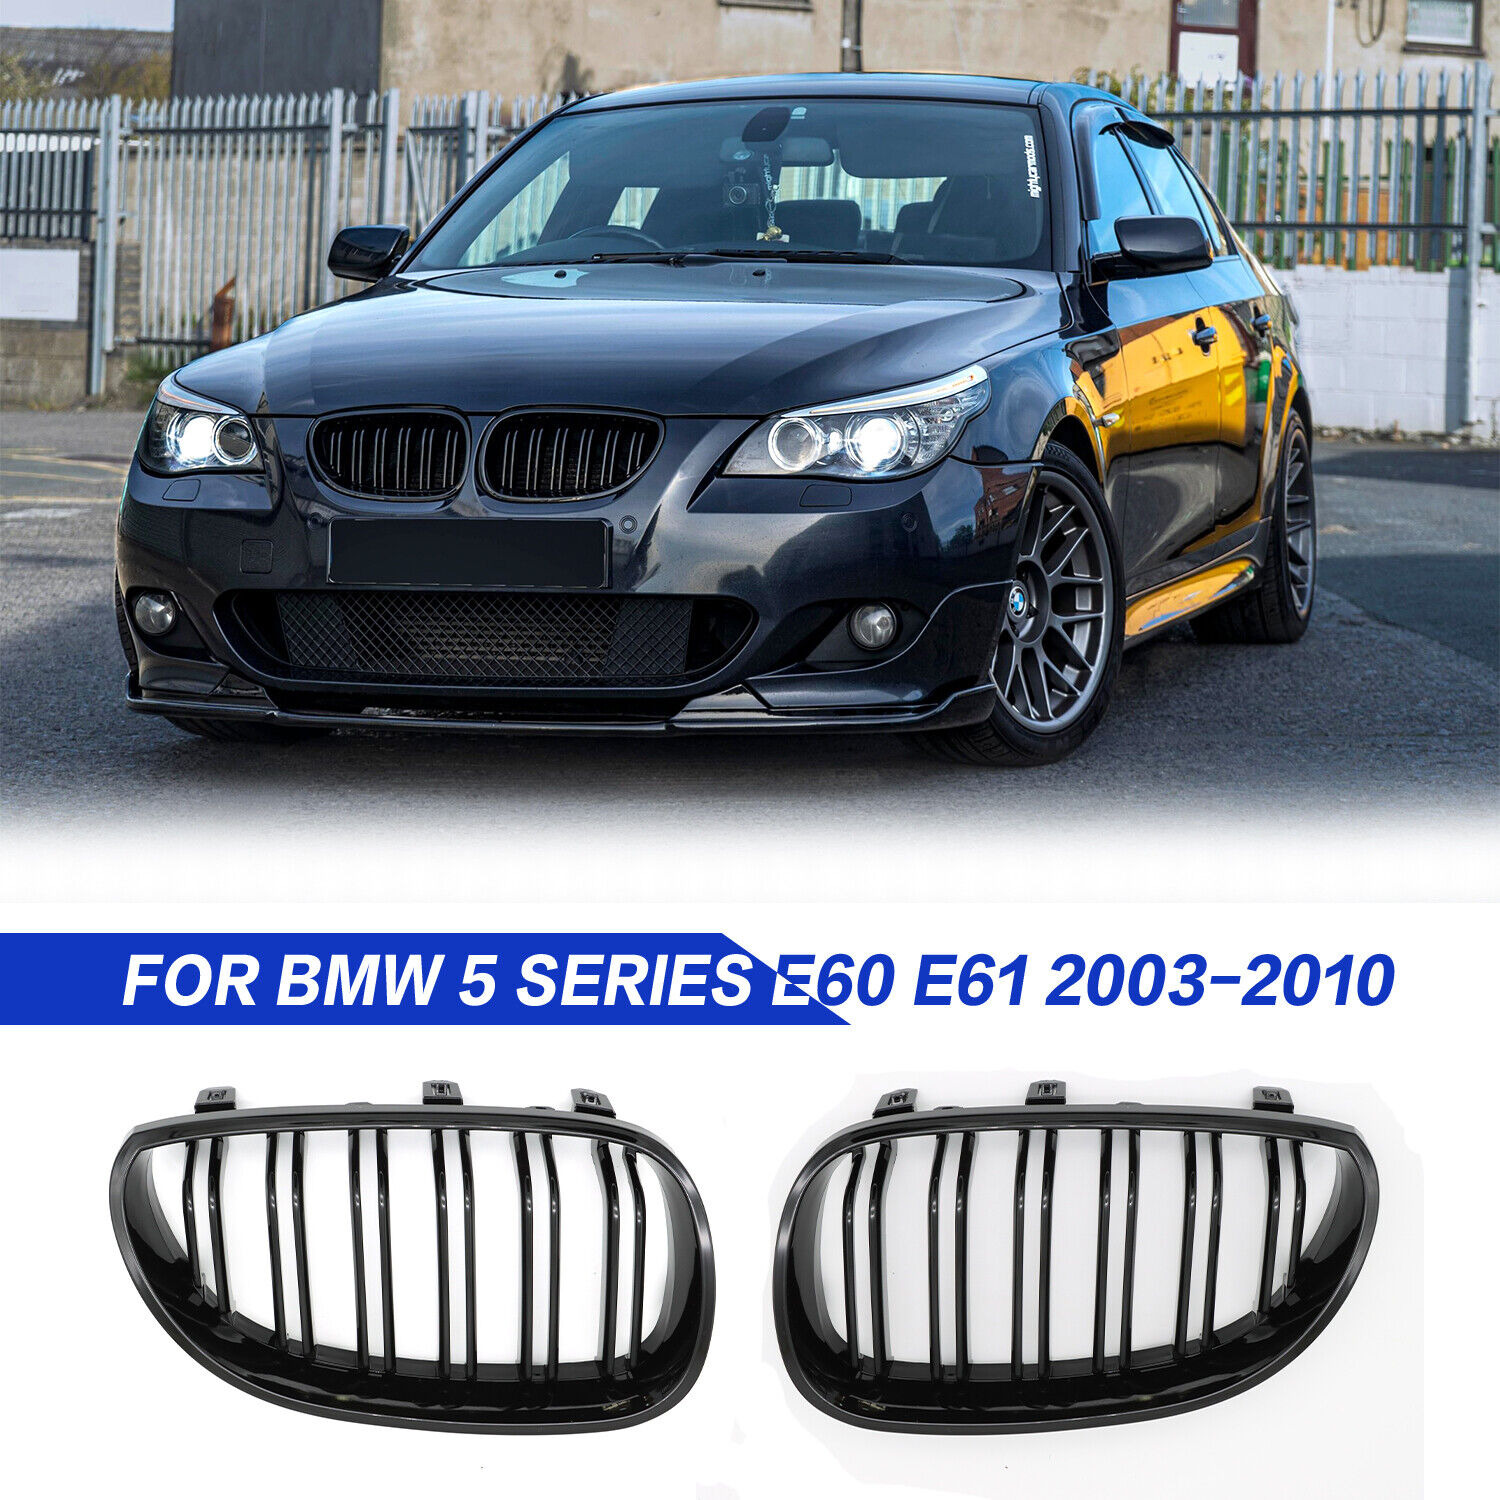 Front Kidney Grill Grille For E60 E61 BMW 5 Series 2003-2010 525i M5 Gloss Black